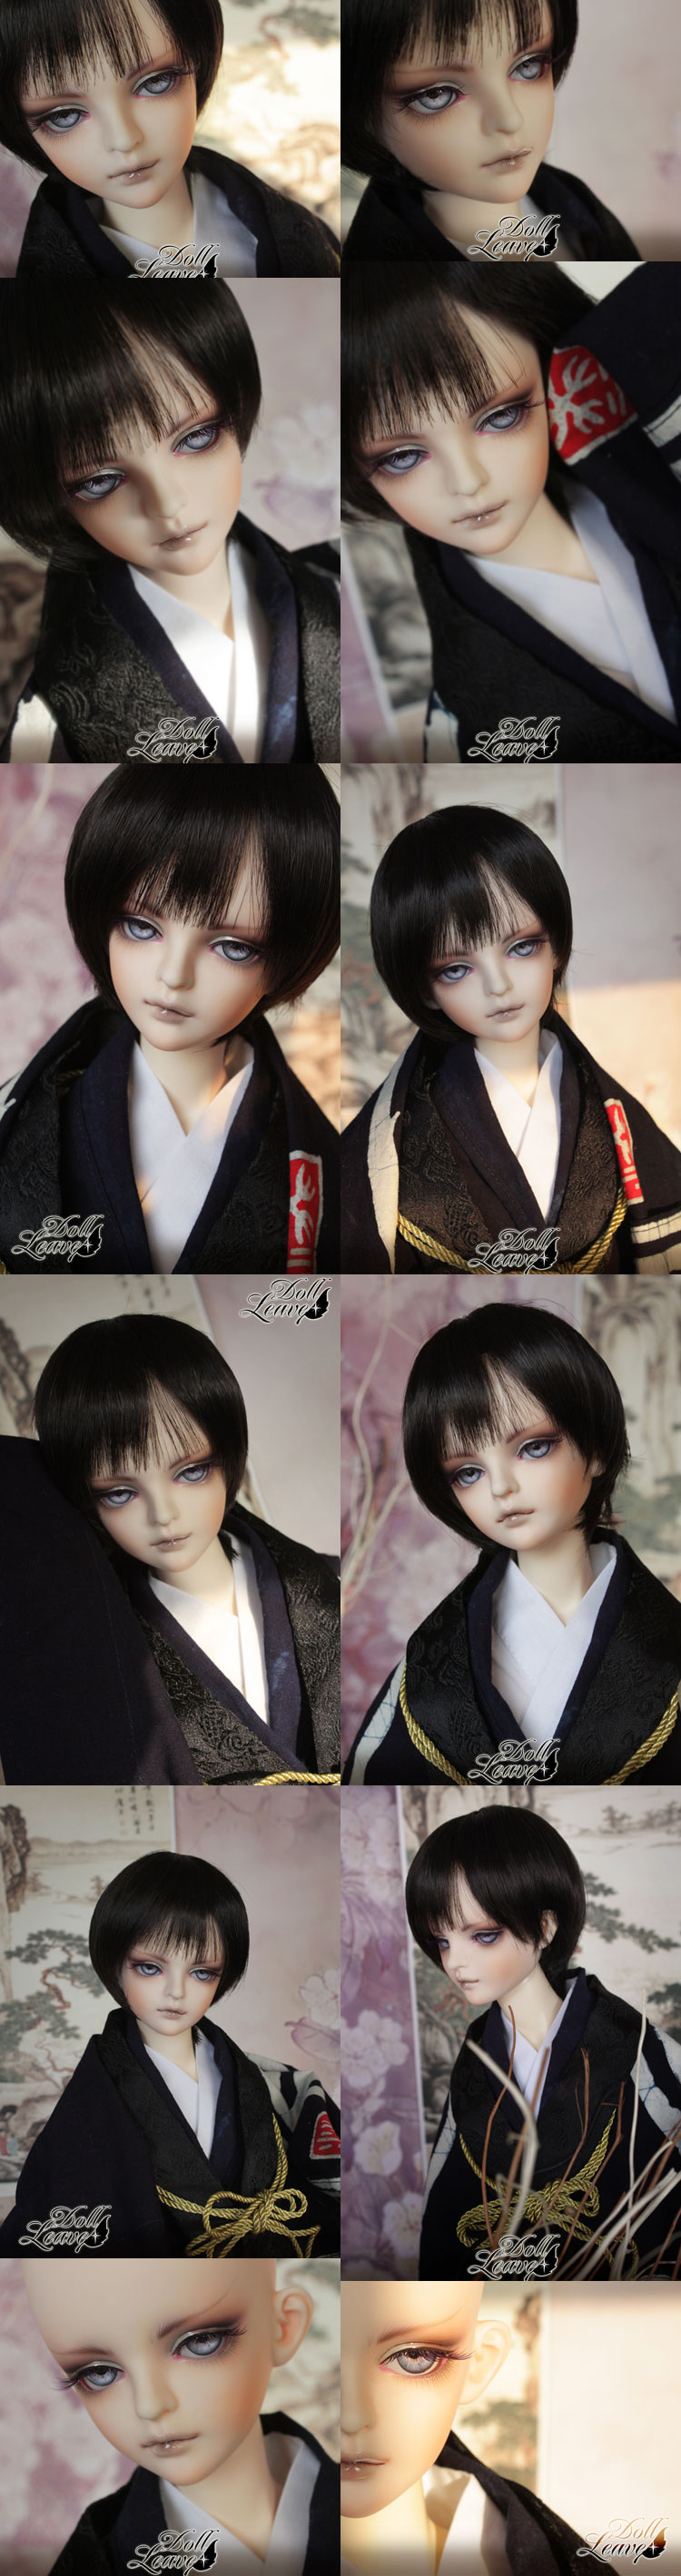 BJD Ziling Boy 60cm Boll-jointed doll